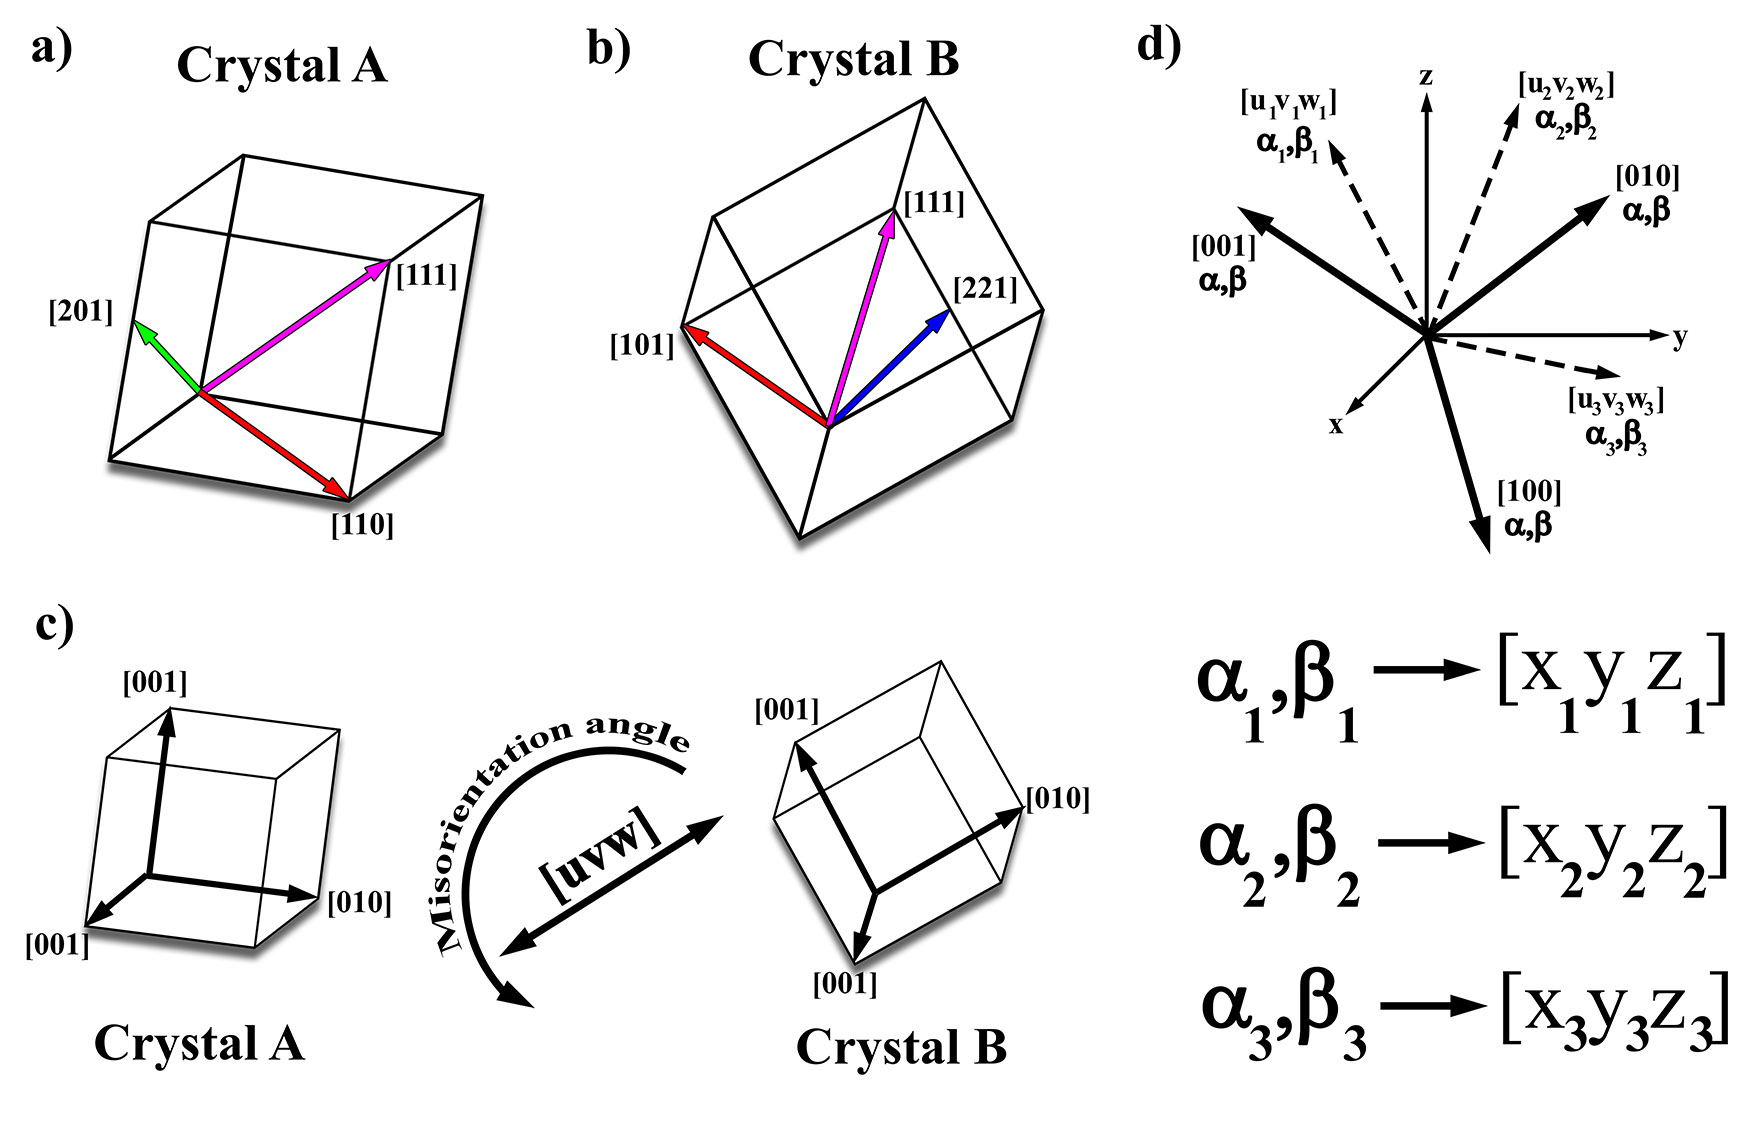 Schematic illustrating how the local misorientation
between two crystals is formulated. a) and b) Crystals A and B in a given
orientation, respectively. c) Misorientation angle and axis between the two crystals.
d) Conversion to primary axes coordinate system.